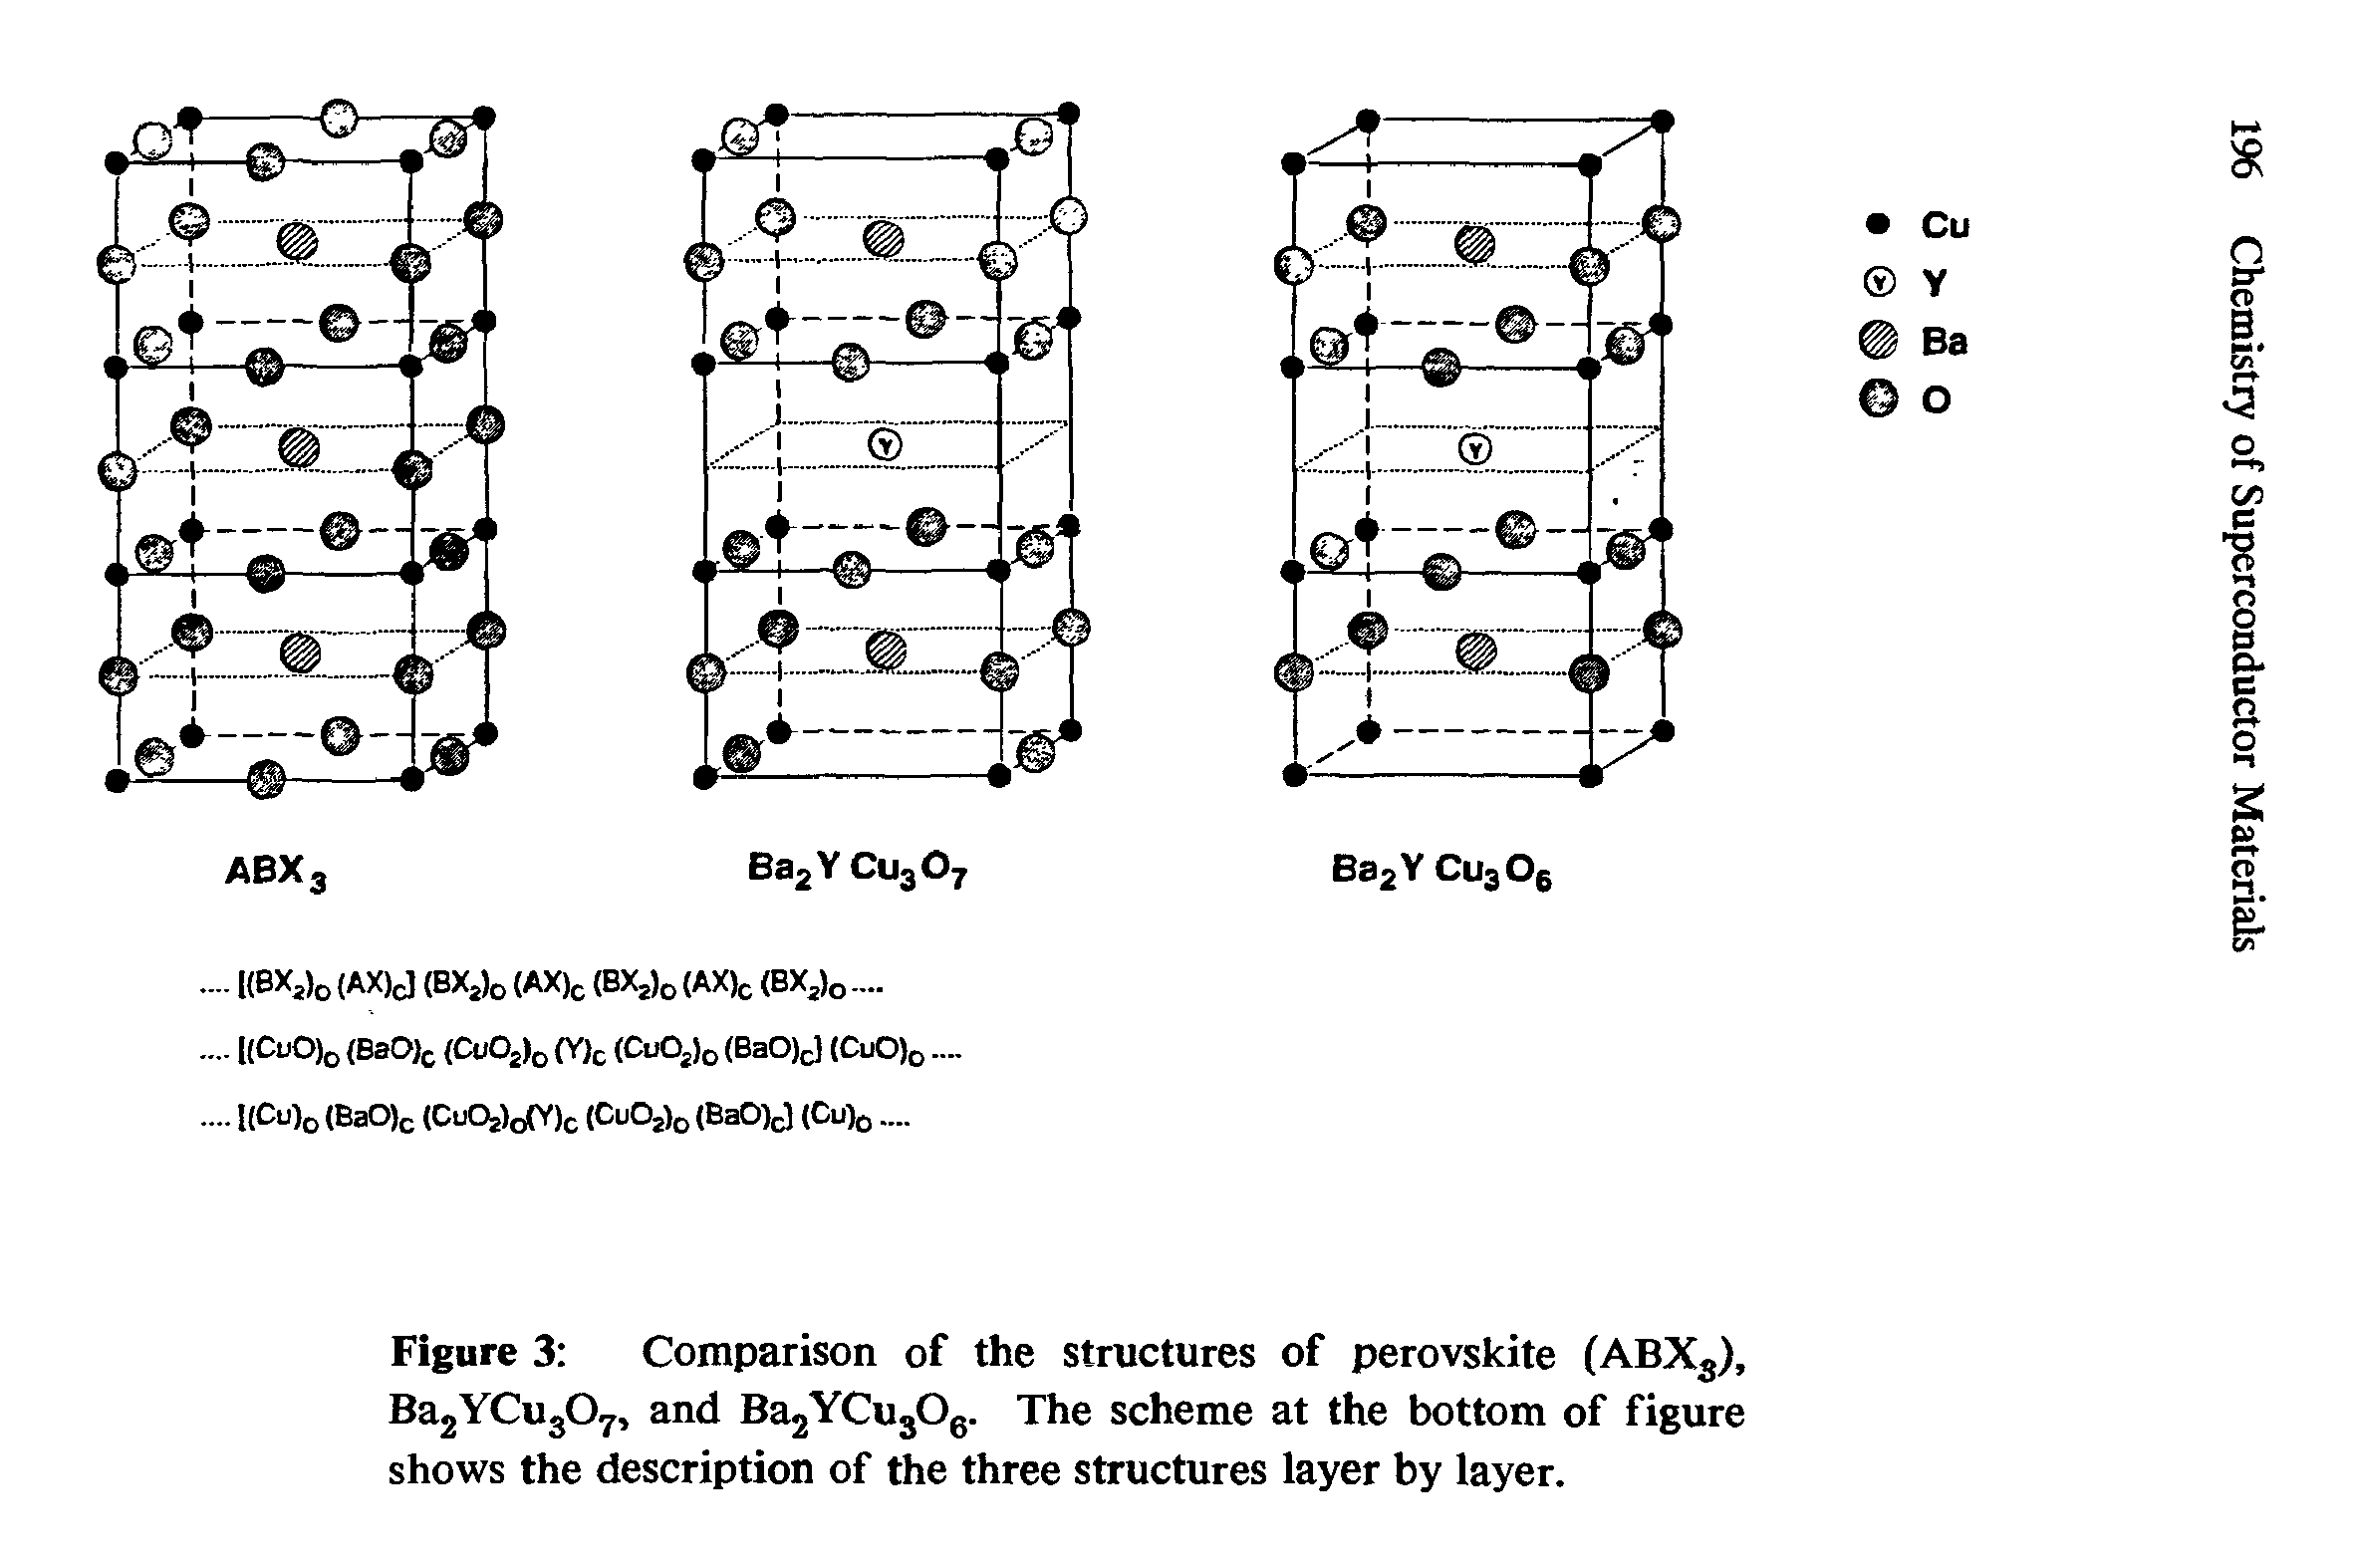 Figure 3 Comparison of the structures of perovskite (ABXS), Ba2YCu307, and Ba2YCu306. The scheme at the bottom of figure shows the description of the three structures layer by layer.